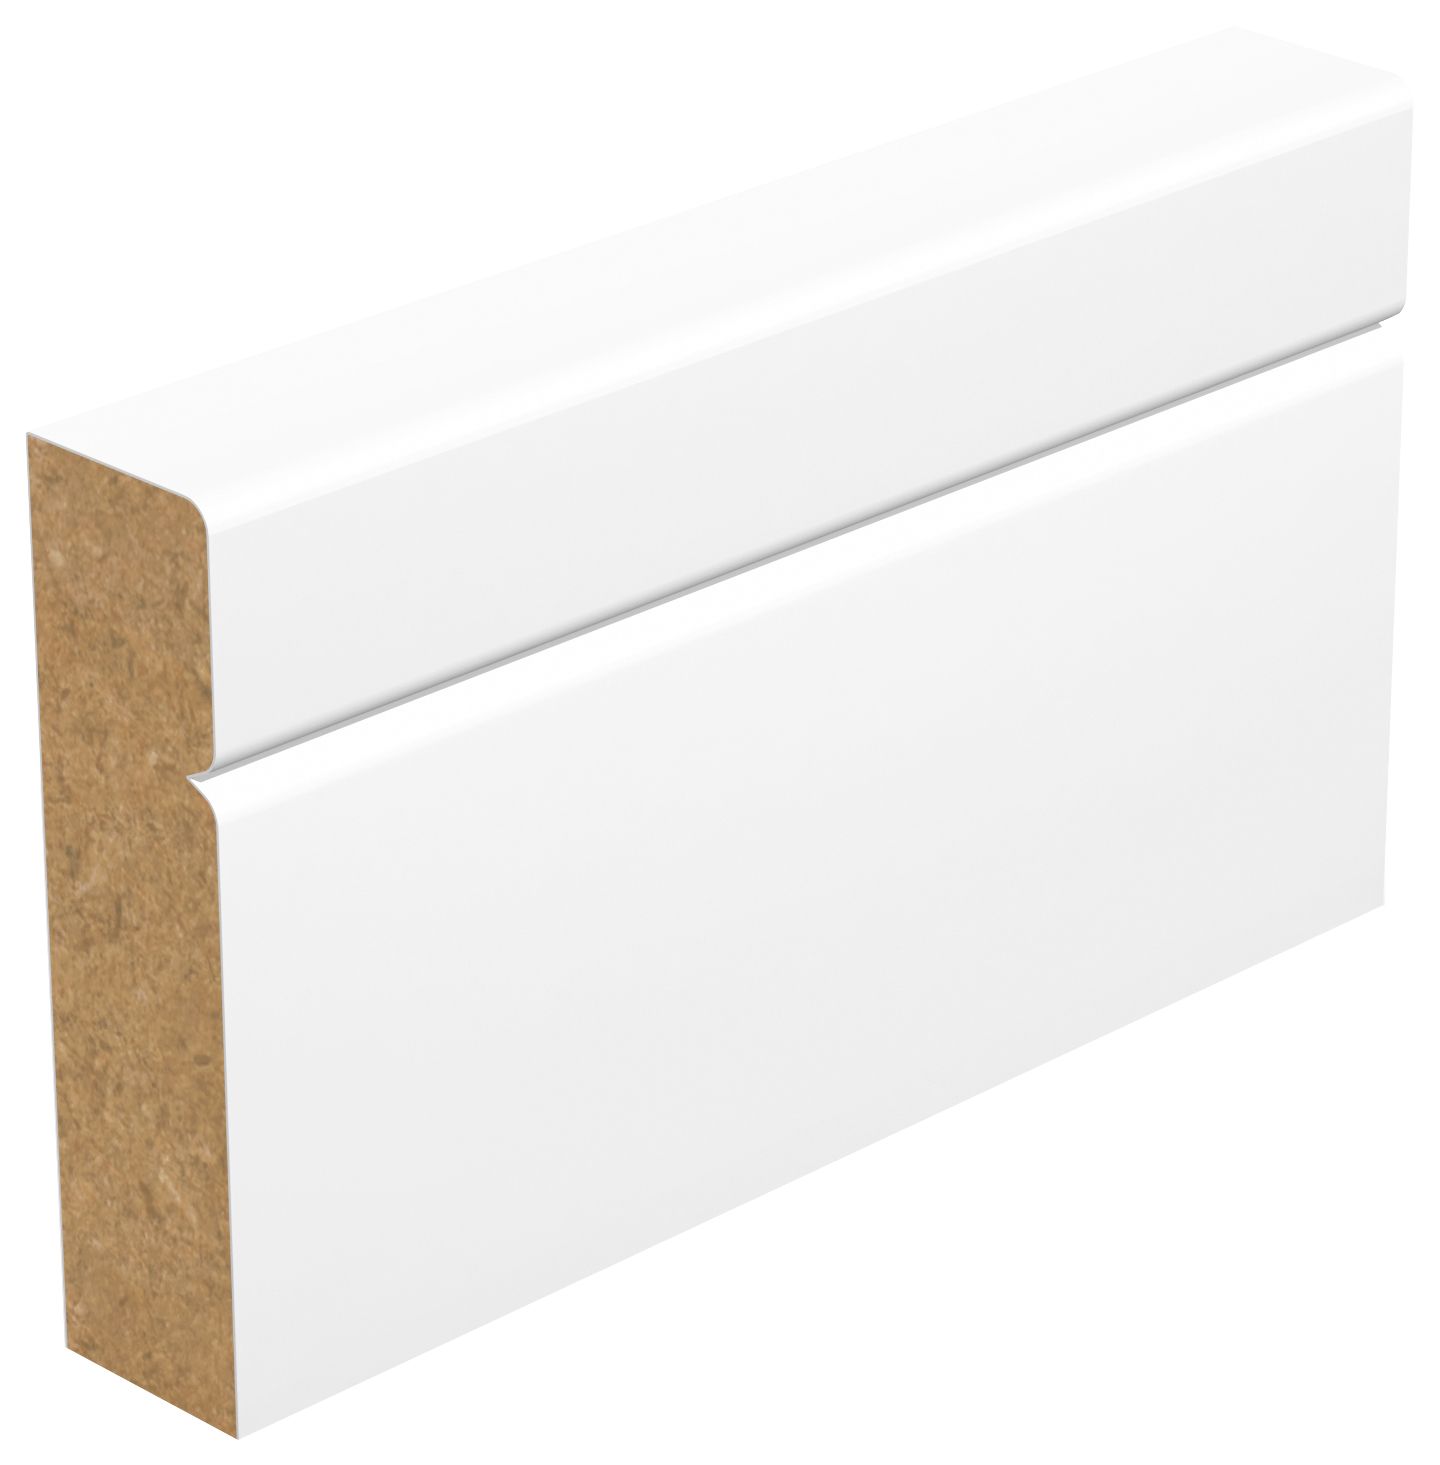 Image of Wickes Contemporary V-Groove MDF Architrave - 18 x 69 x 2100mm - Pack of 5